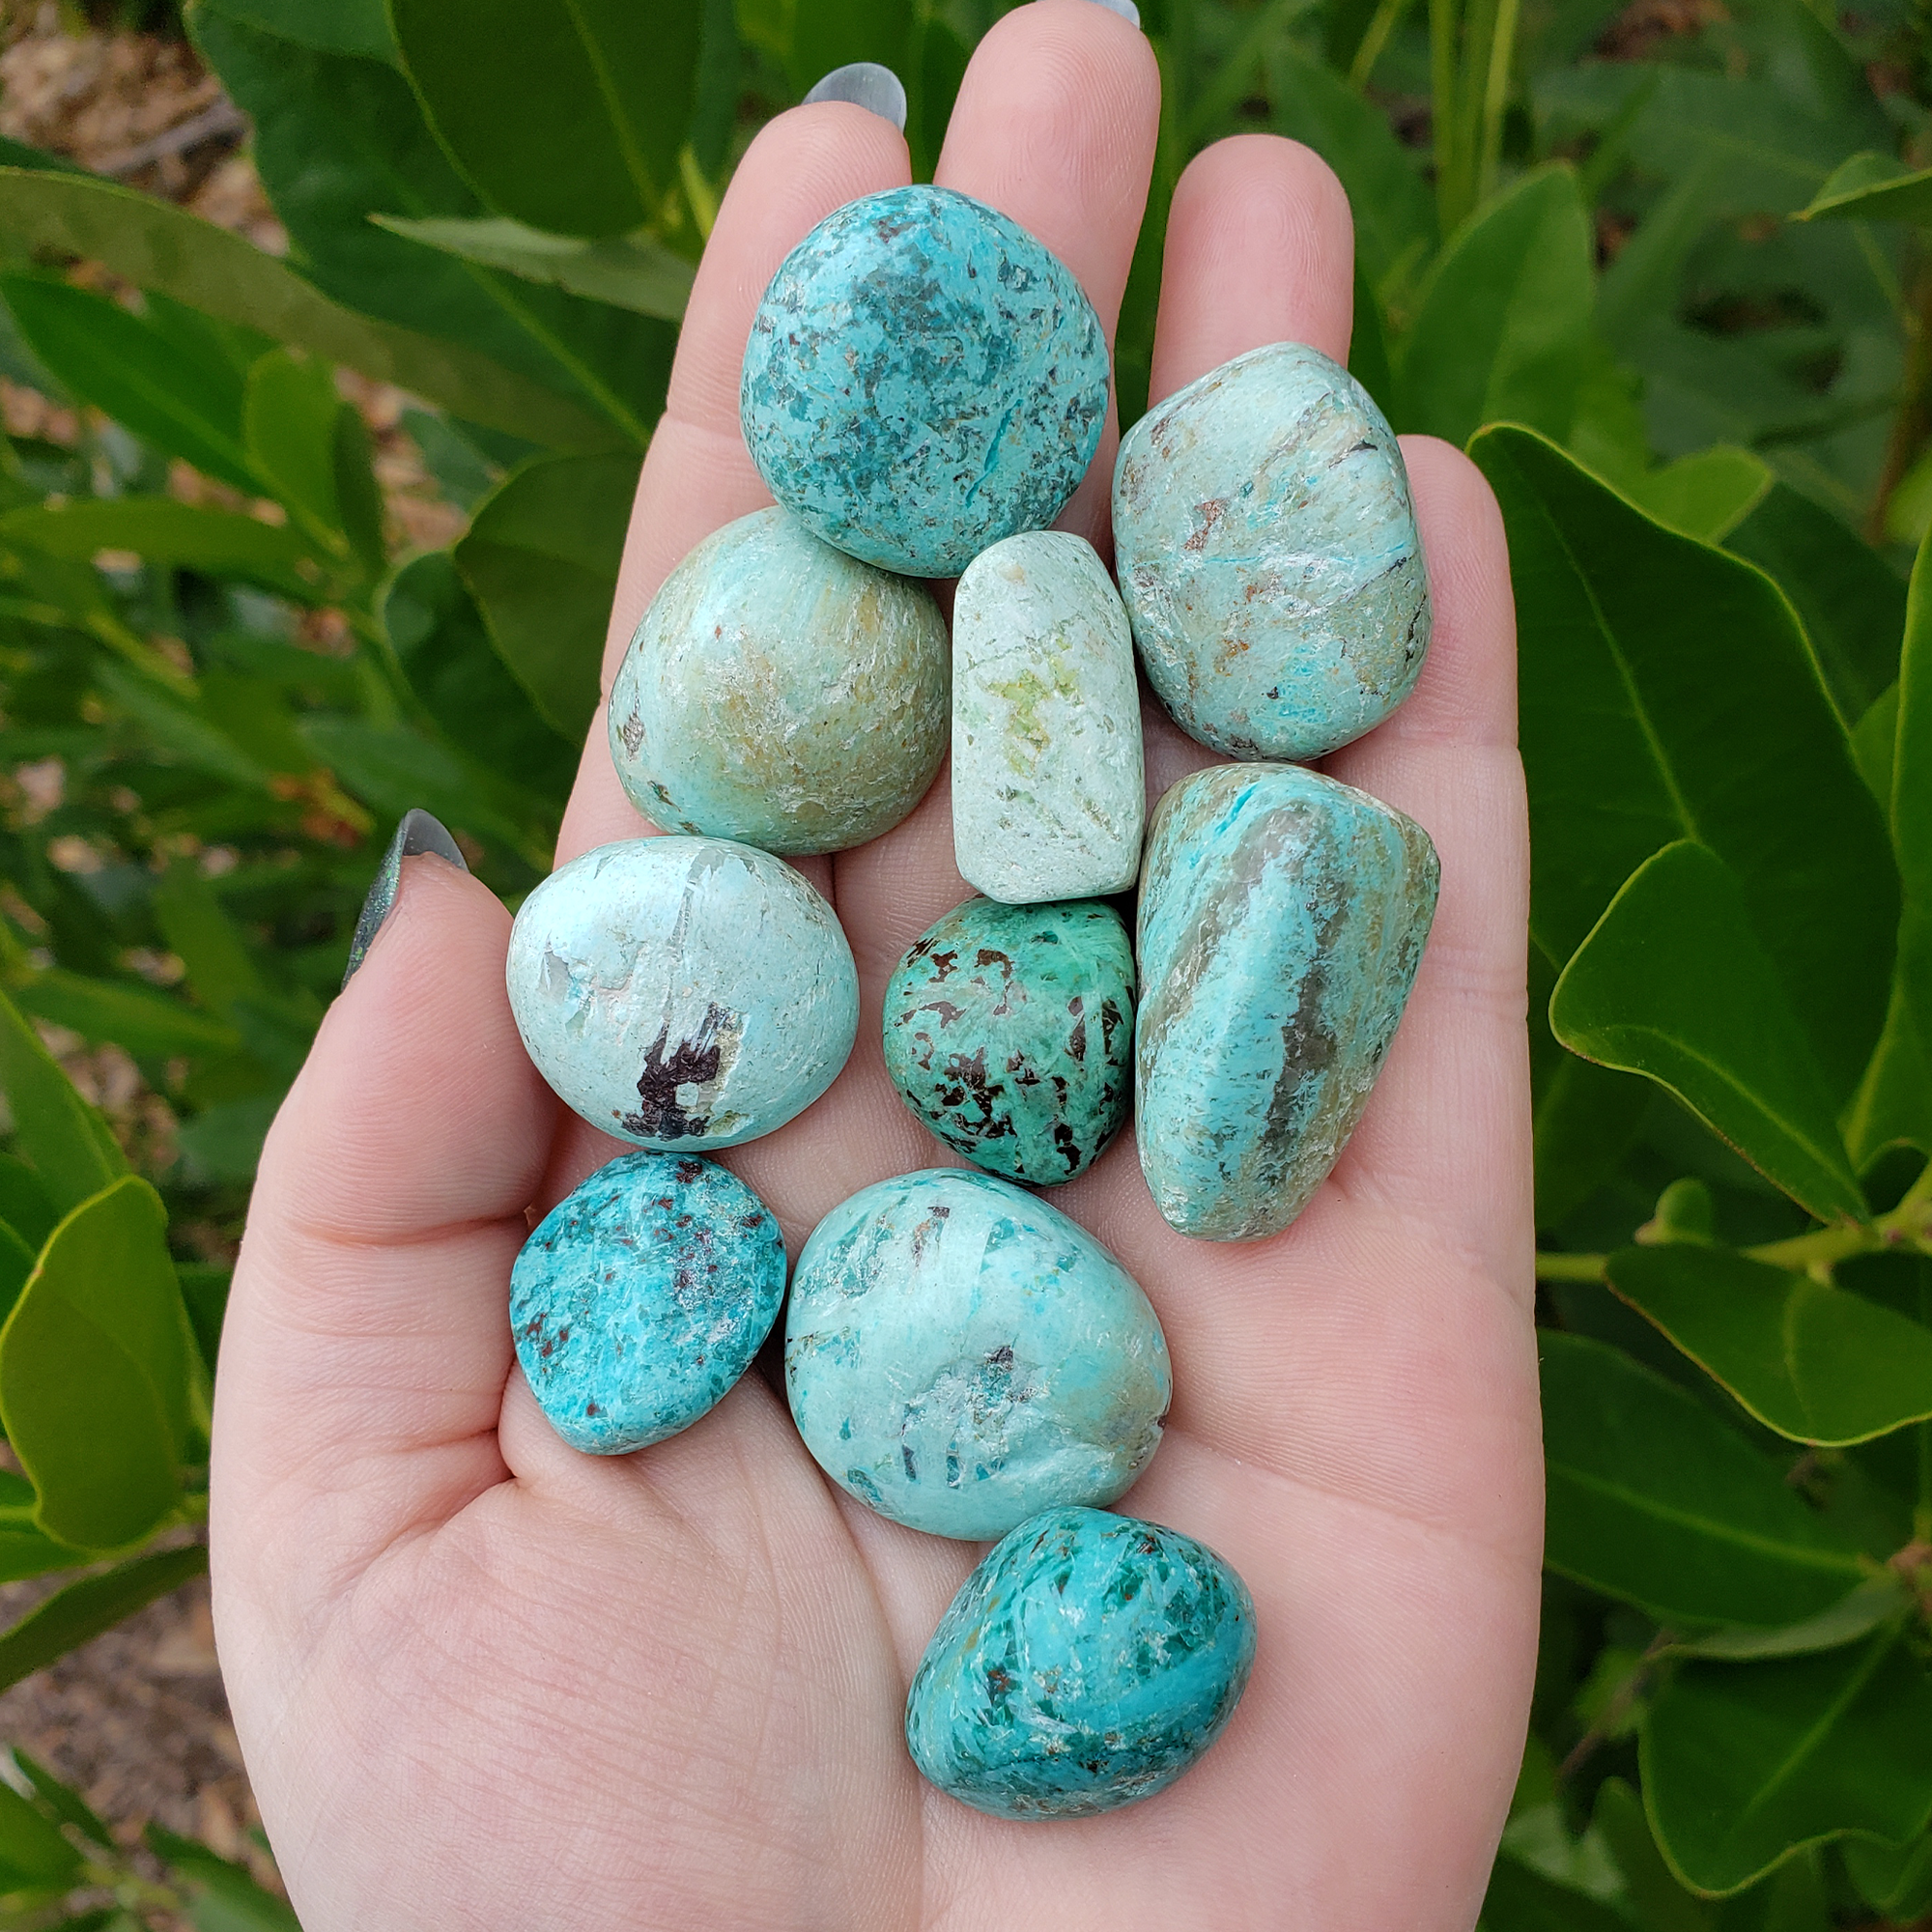 Peruvian Turquoise Natural Tumbled Stone - One Stone - In Outdoor Light